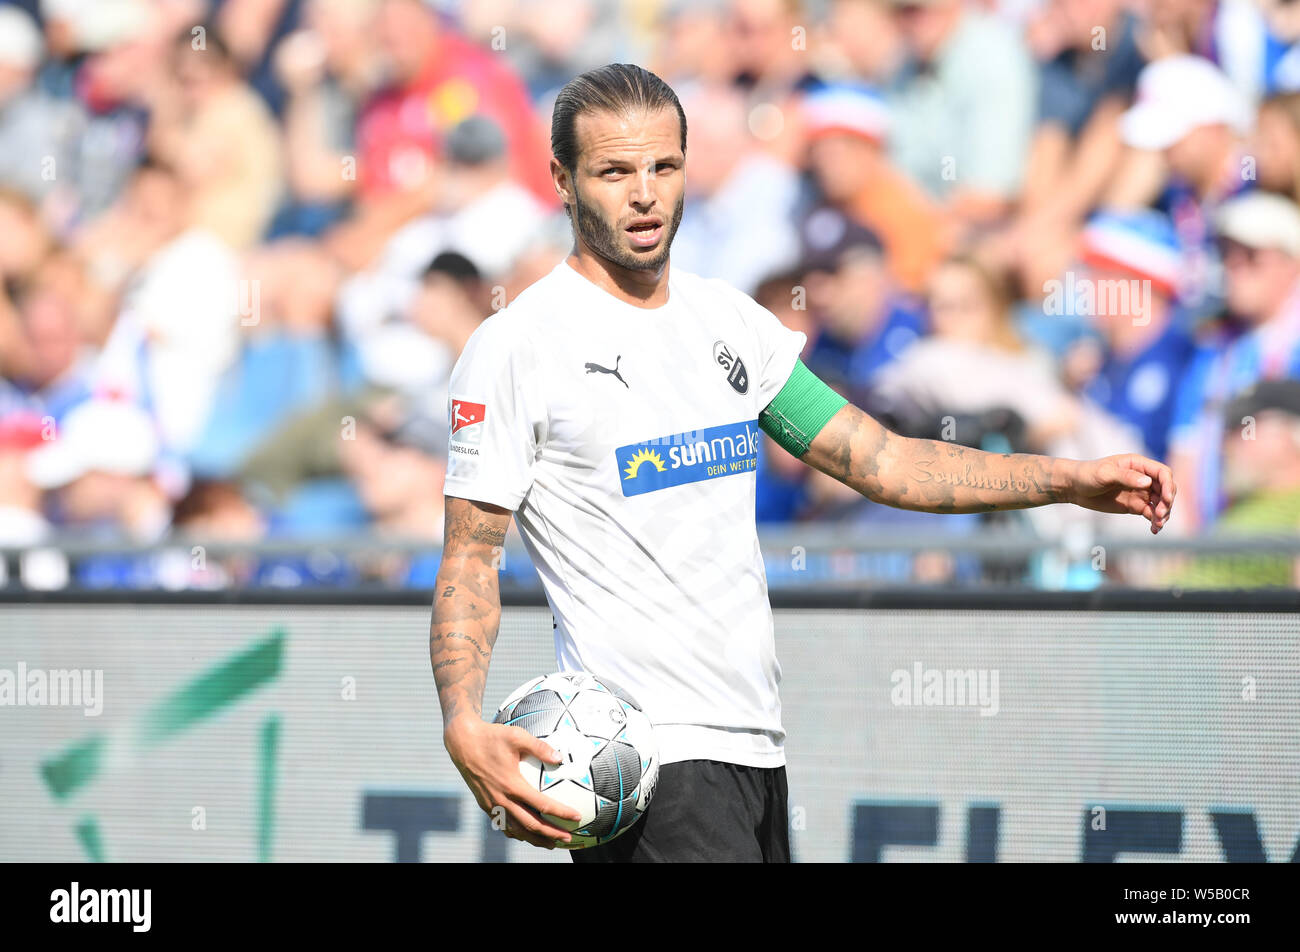 Kiel, Germany. 27th July, 2019. Soccer: 2nd Bundesliga, Holstein Kiel - SV Sandhausen, 1st matchday. Sandhausen's Dennis Diekmeier is at the throw-in. Credit: Carmen Jaspersen/dpa - IMPORTANT NOTE: In accordance with the requirements of the DFL Deutsche Fußball Liga or the DFB Deutscher Fußball-Bund, it is prohibited to use or have used photographs taken in the stadium and/or the match in the form of sequence images and/or video-like photo sequences./dpa/Alamy Live News Stock Photo